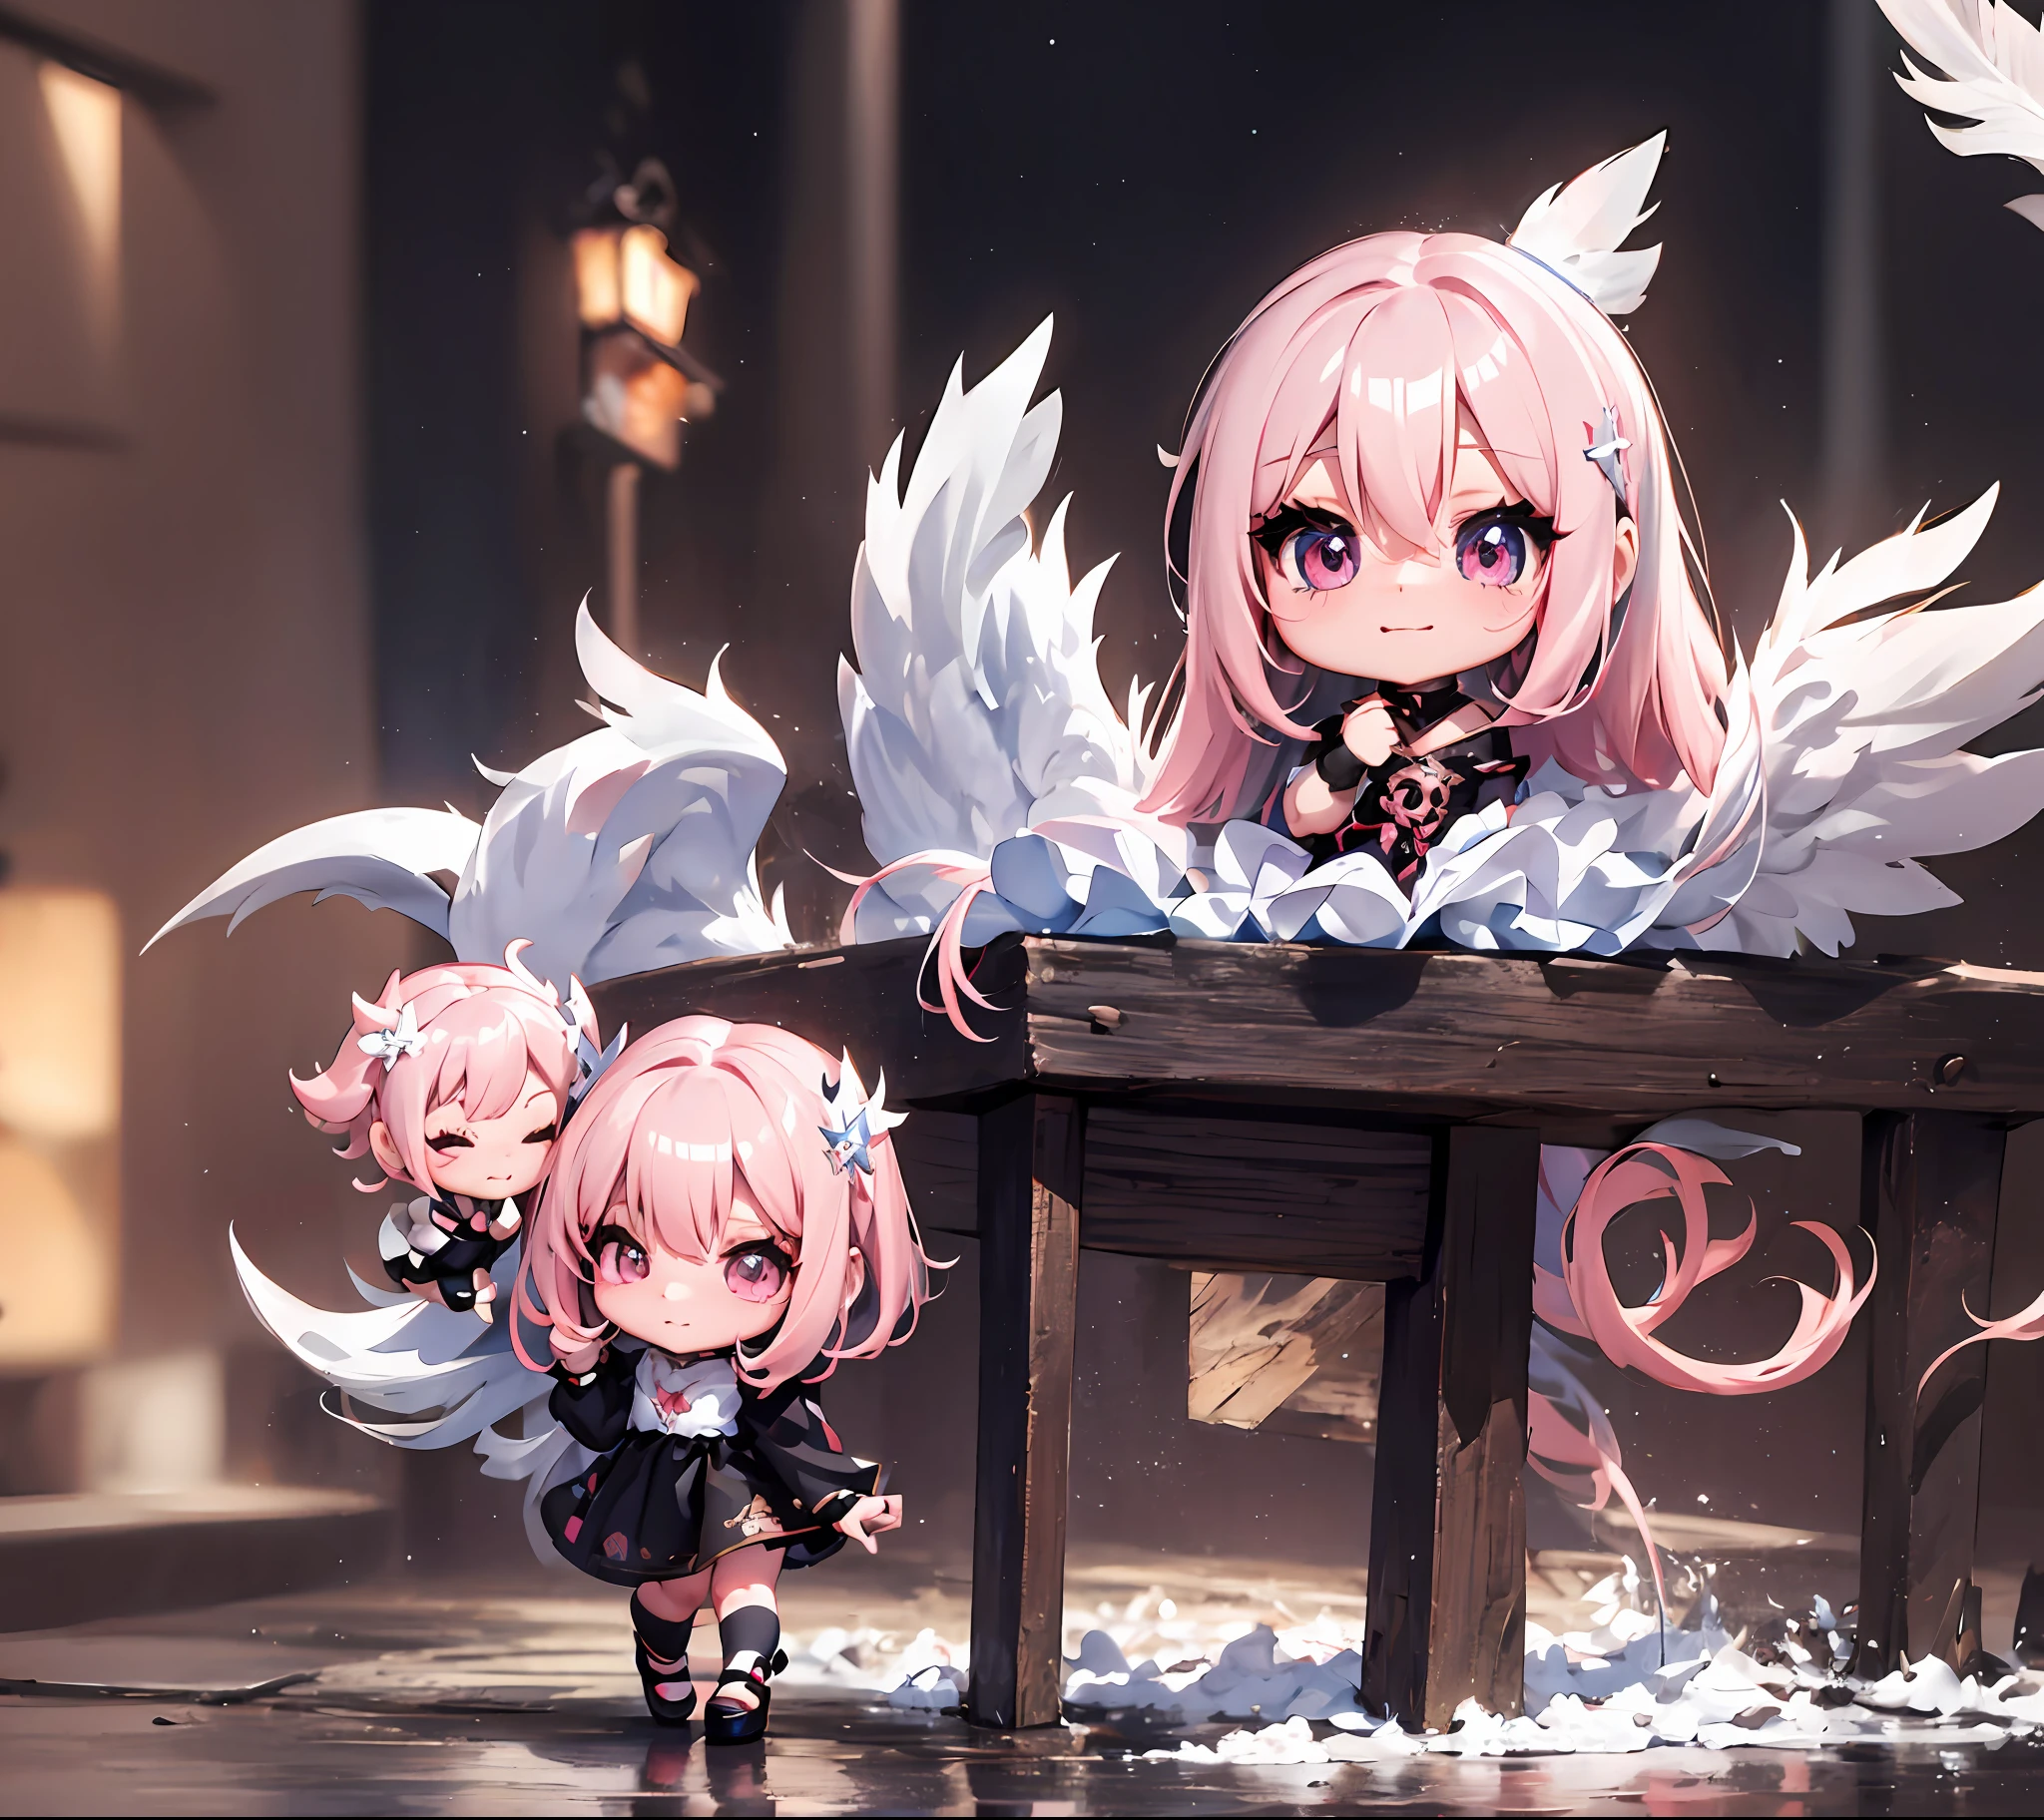 1 anime angel doll, (Chibi: 1.2), 8K high quality detail art, white feathers on the back, pink hair, gradient, twinkle, style as Nendoroid, stylized anime, anime style 4K, cute detailed digital art, Guweiz style artwork, 8K octar rendering photos, advanced digital chibi art, Cute 3d render, anime style, light, glow